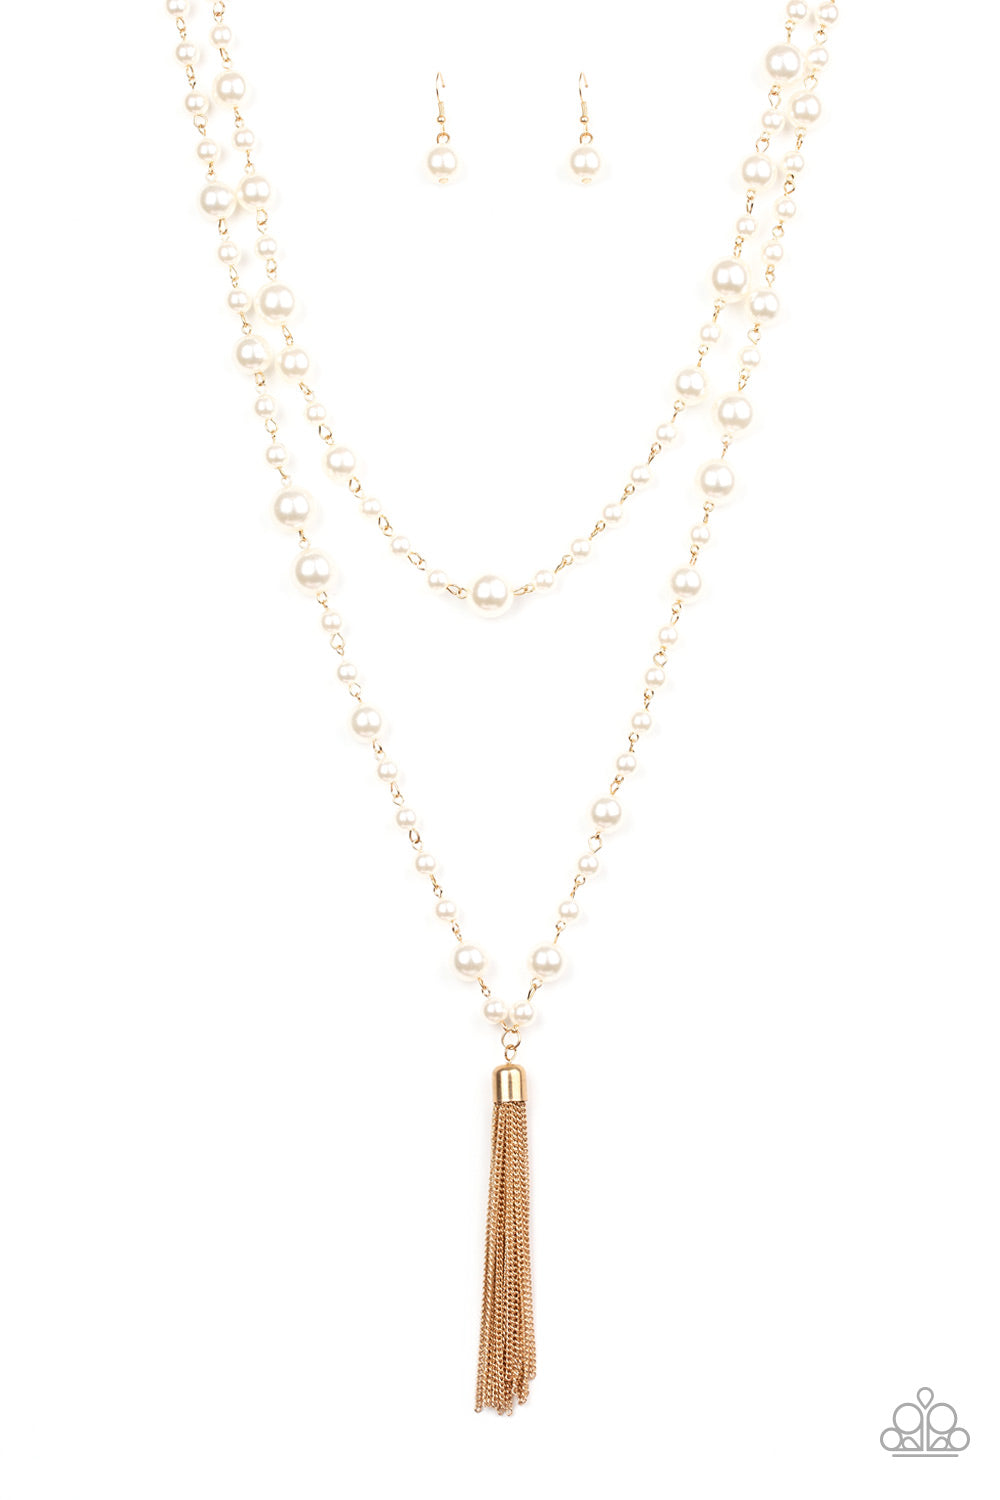 Paparazzi Accessories: Challenge Accepted - Gold Pearl Necklace